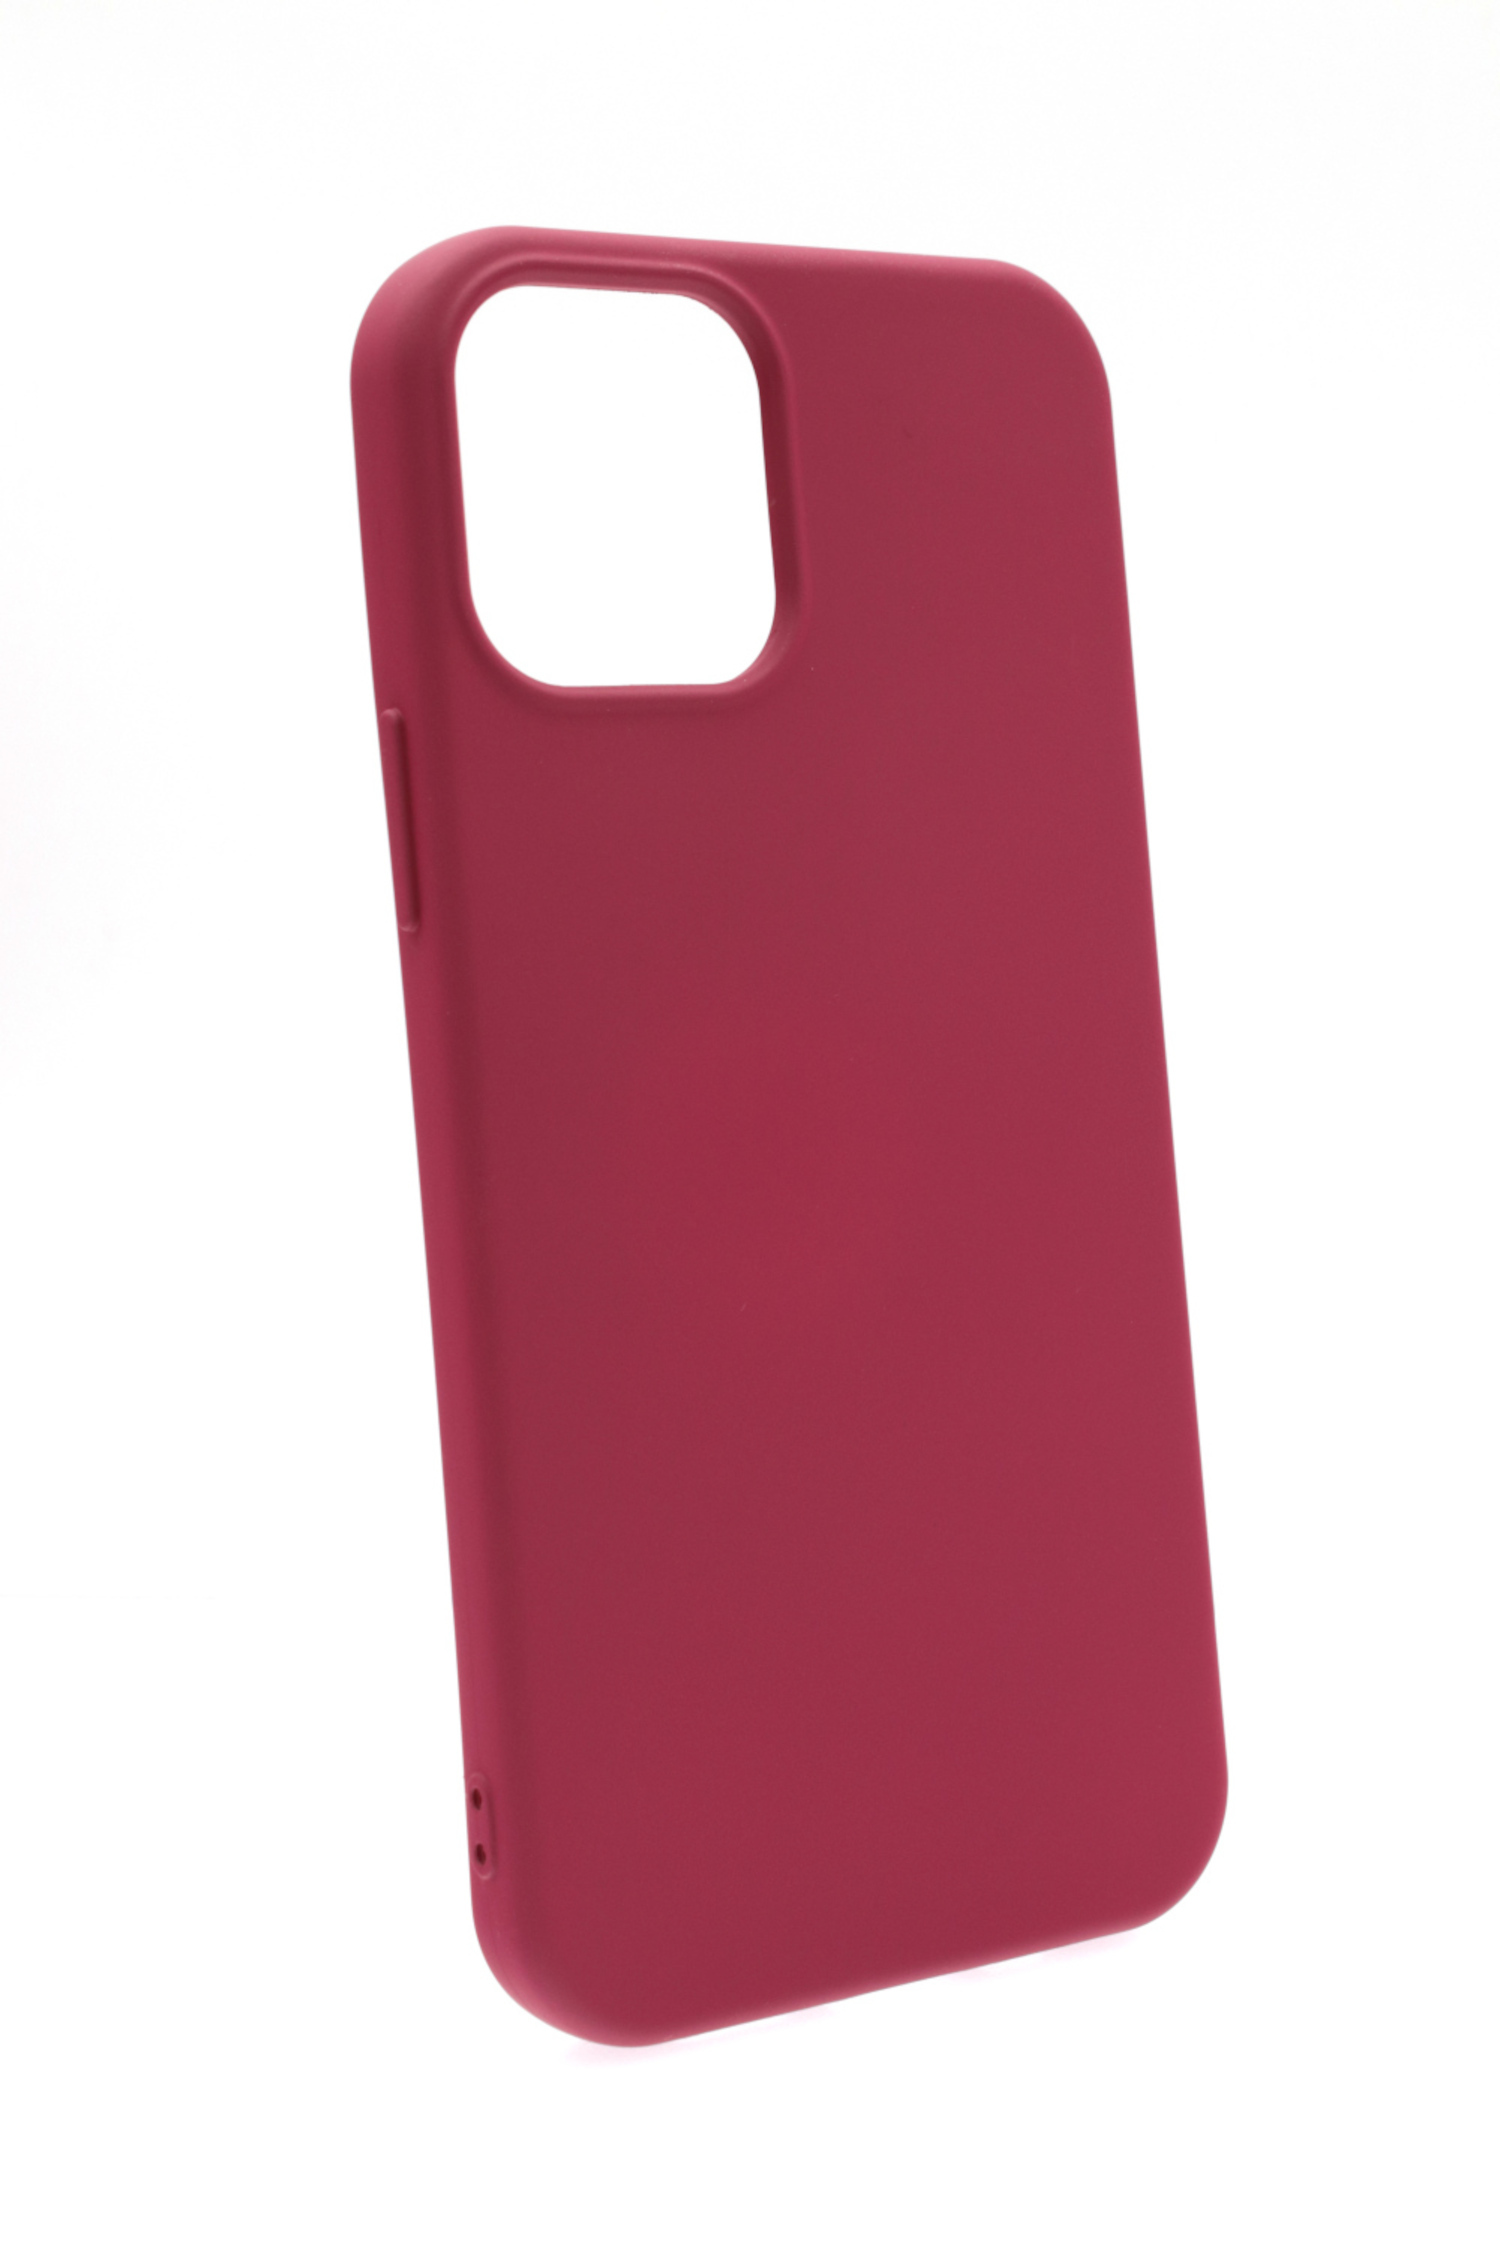 12 Maroon Pro, JAMCOVER Silikon Backcover, iPhone Apple, 12, iPhone Case,